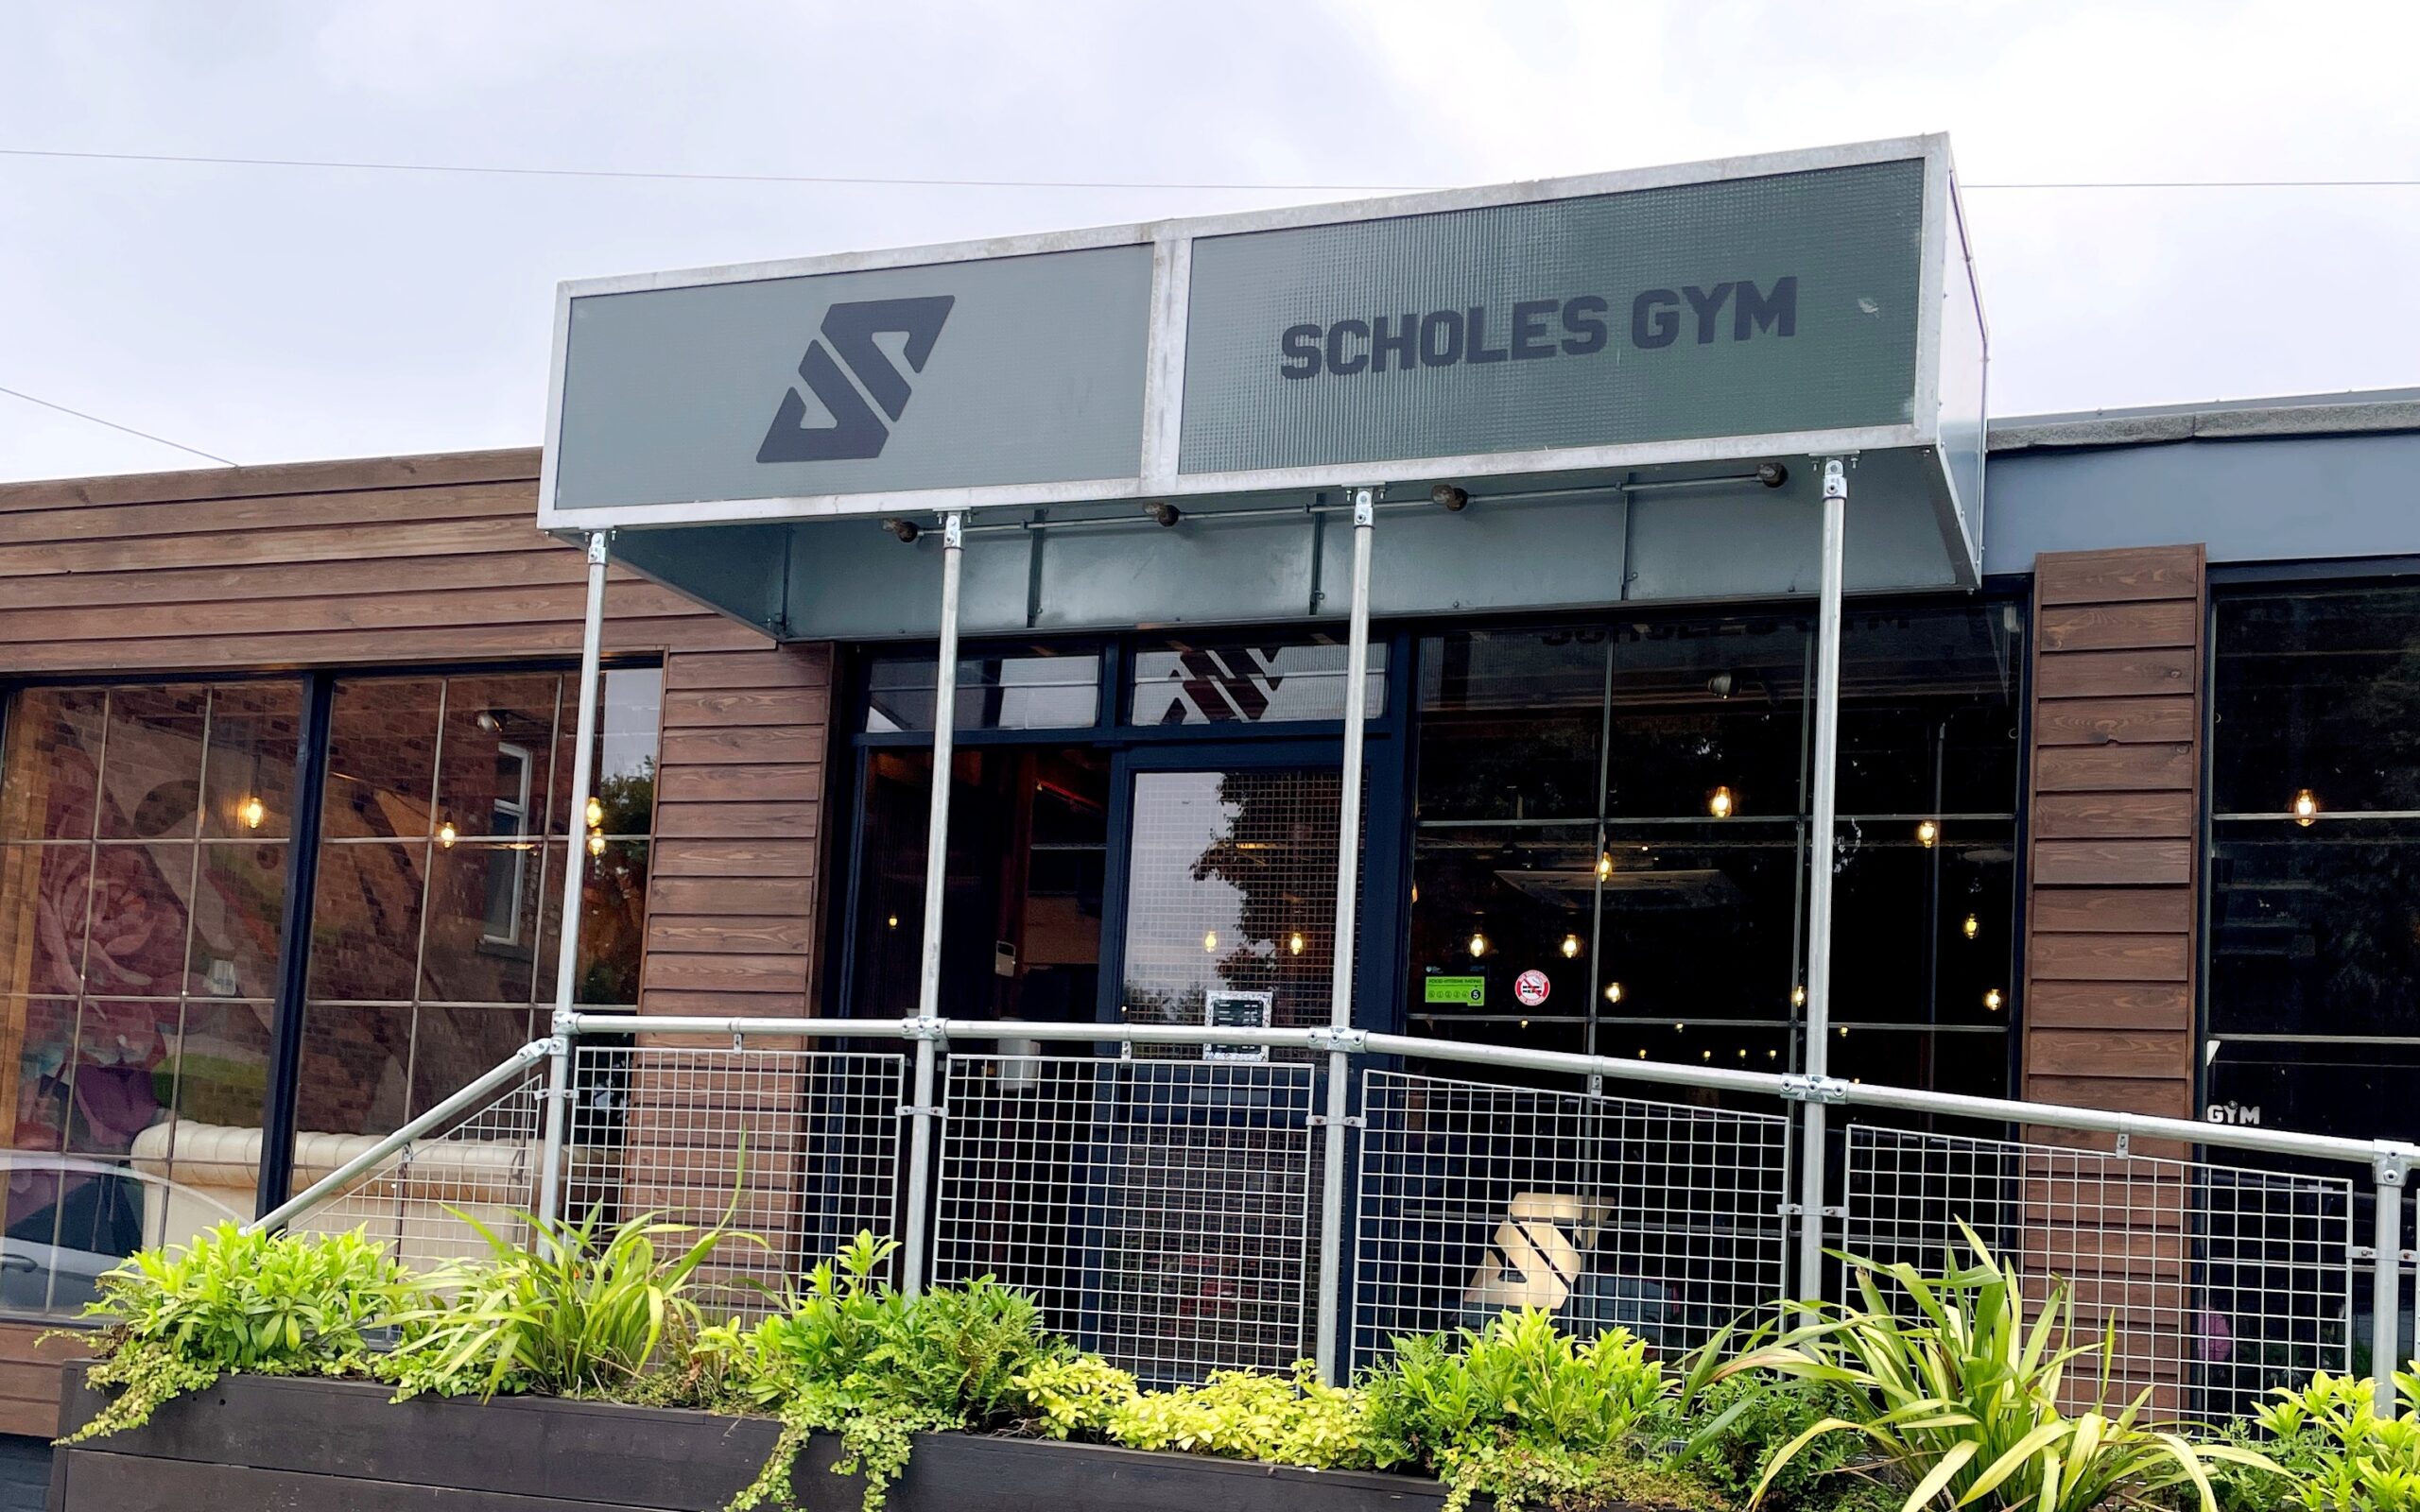 Oldham gym owned by Paul Scholes and his children